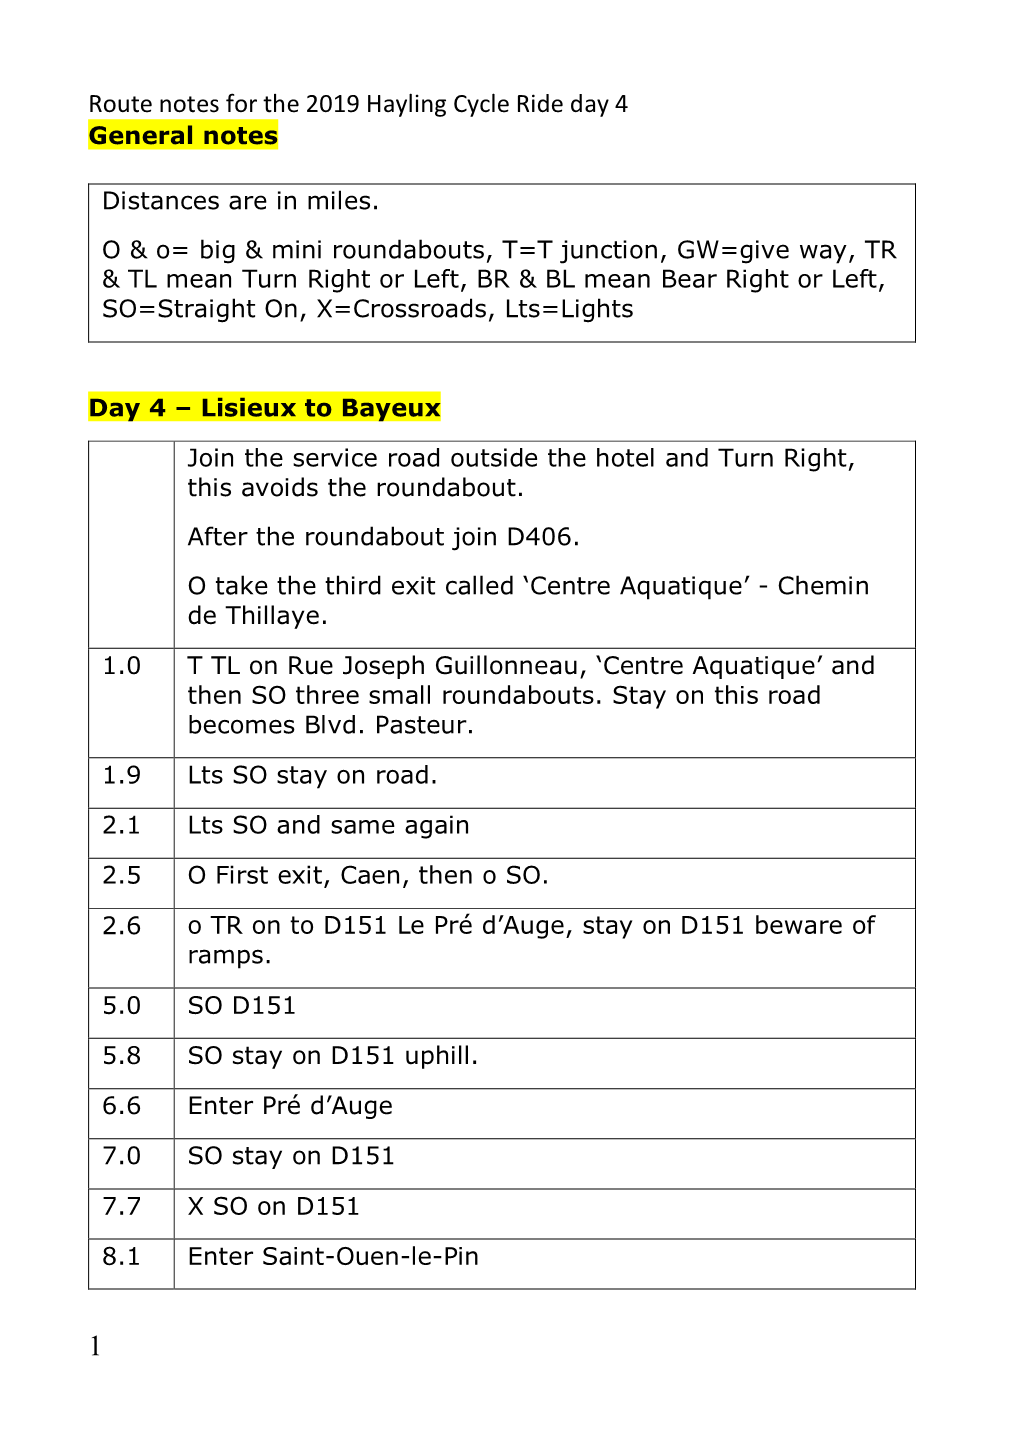 Route Notes for the 2019 Hayling Cycle Ride Day 4 General Notes